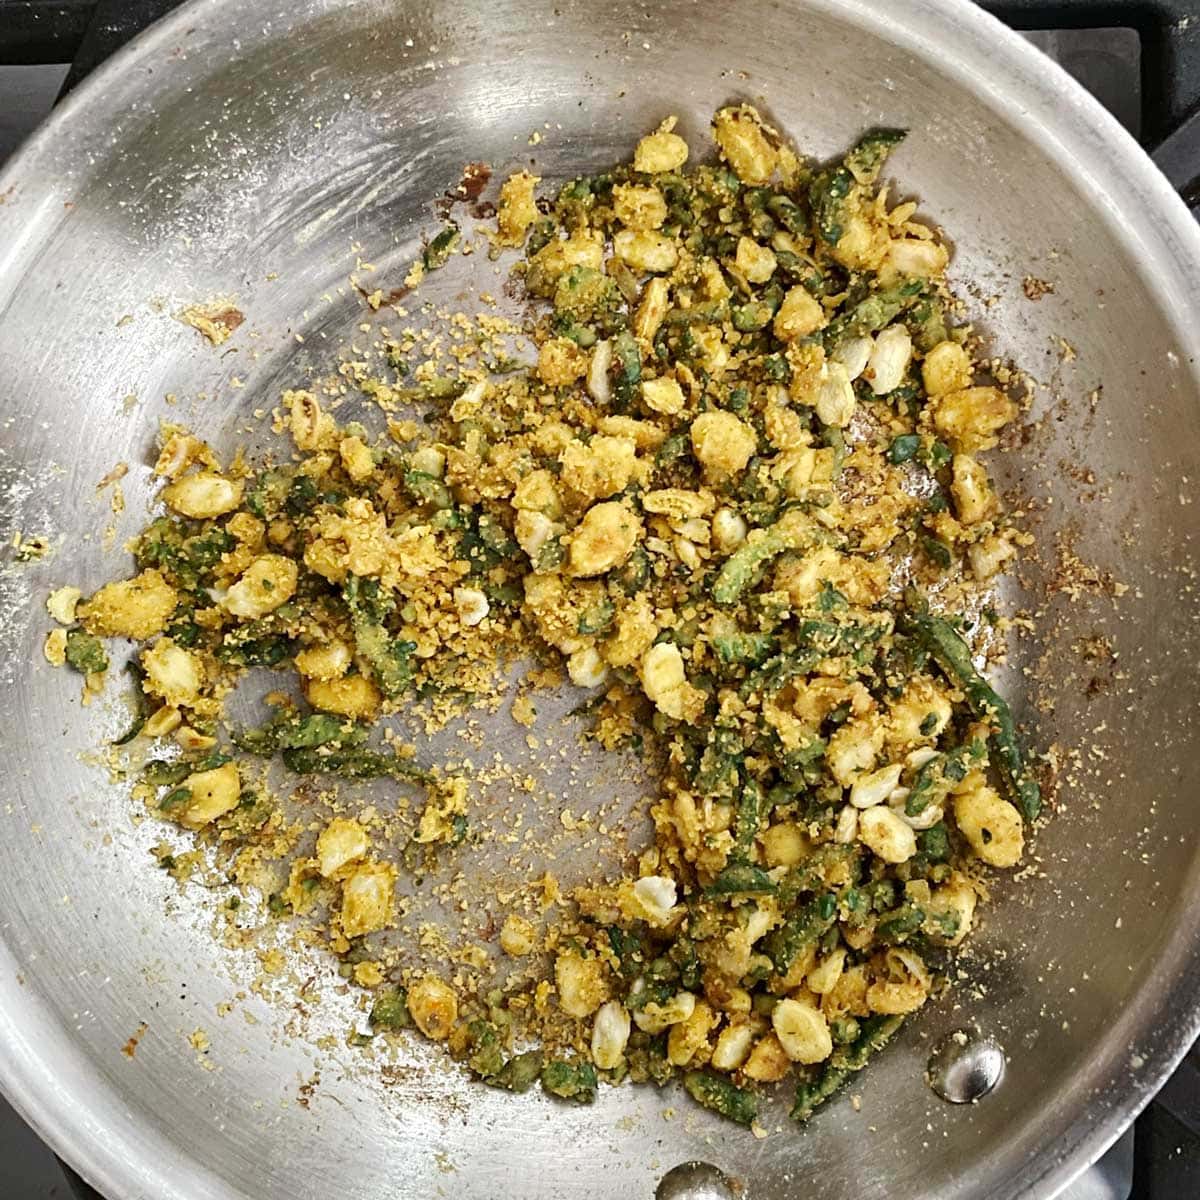 Stuffed karela filling cooked in a skillet.